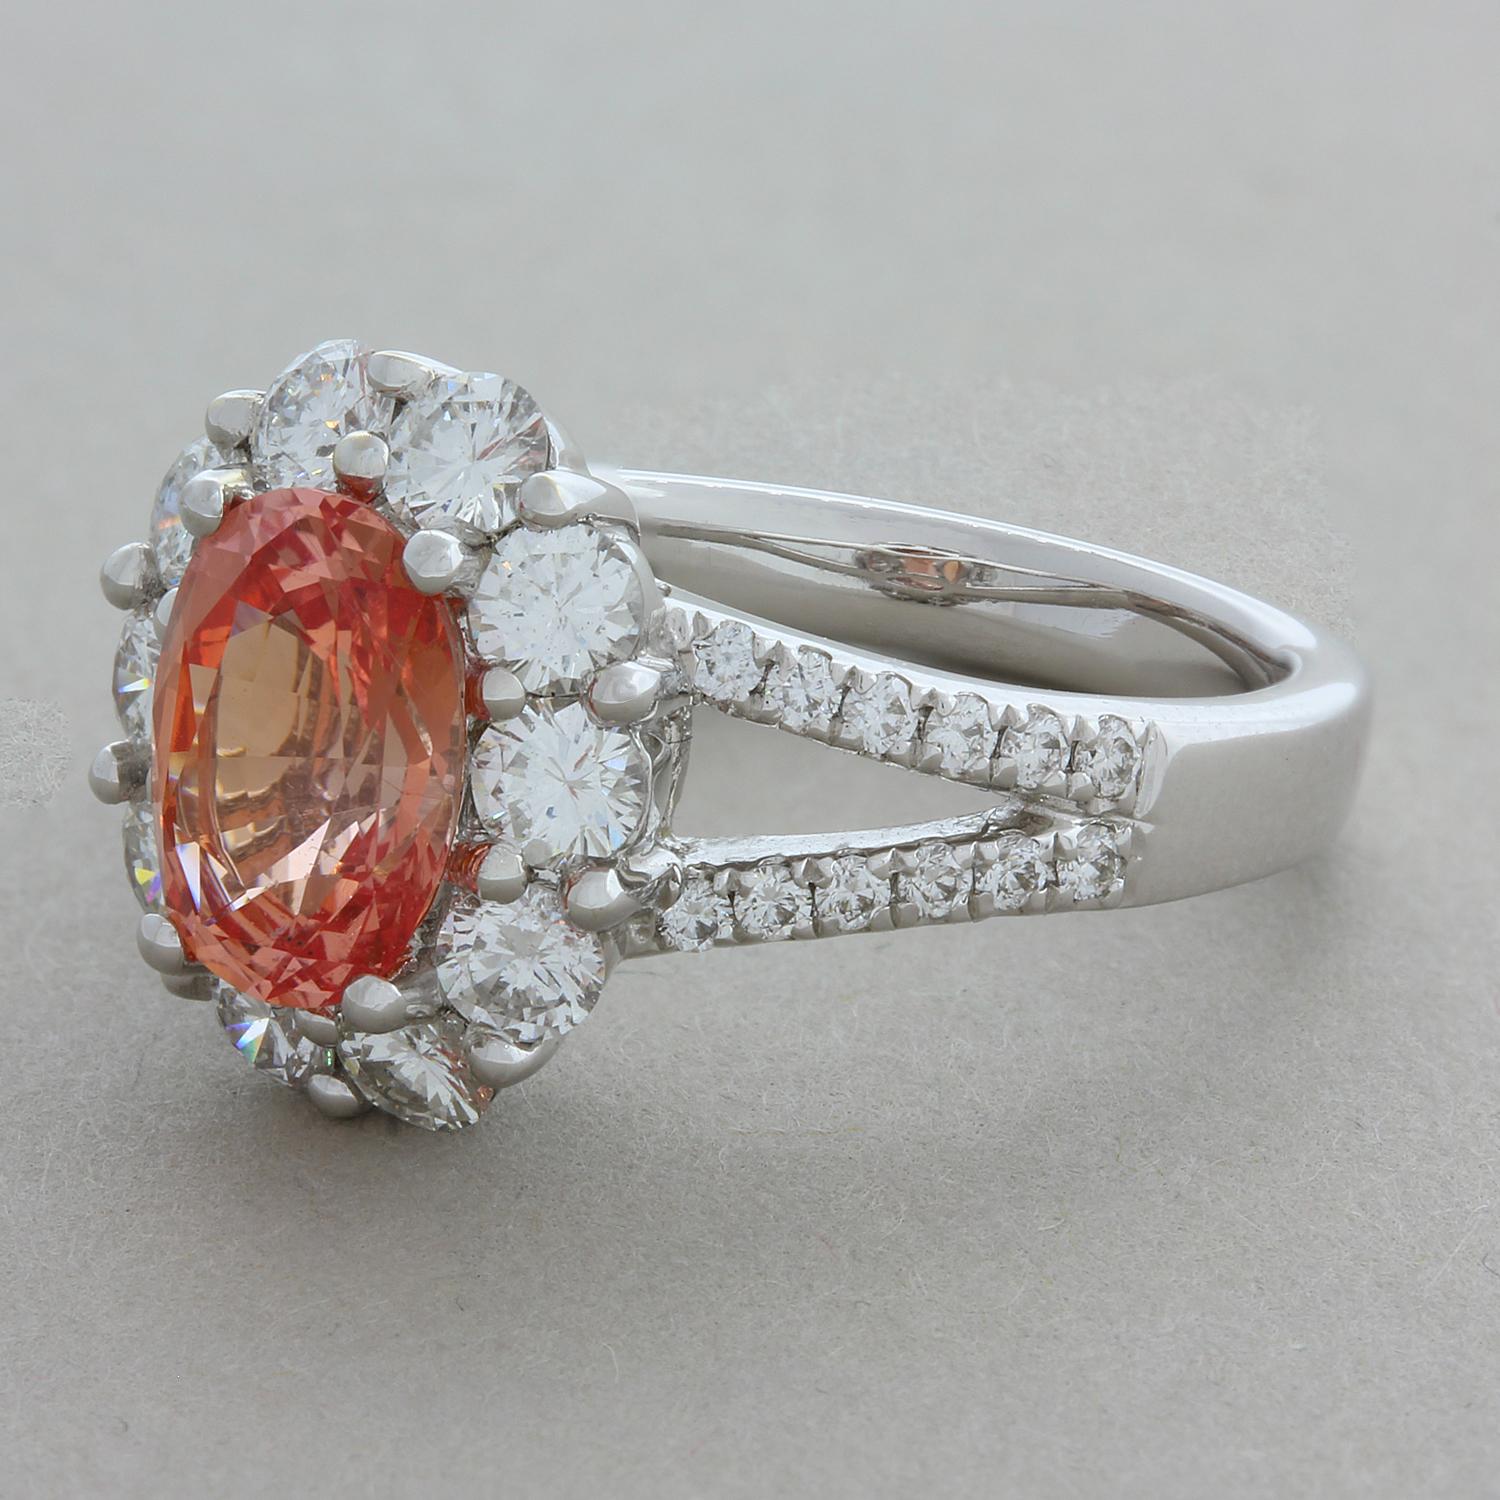 A summer evoking GIA certified Padparadscha sapphire weighing 2.16 carats with a rich lotus flower color takes center stage of this lovely ring. It is accented by 1.40 carats of round brilliant cut diamonds that halo the rare sapphire and run along